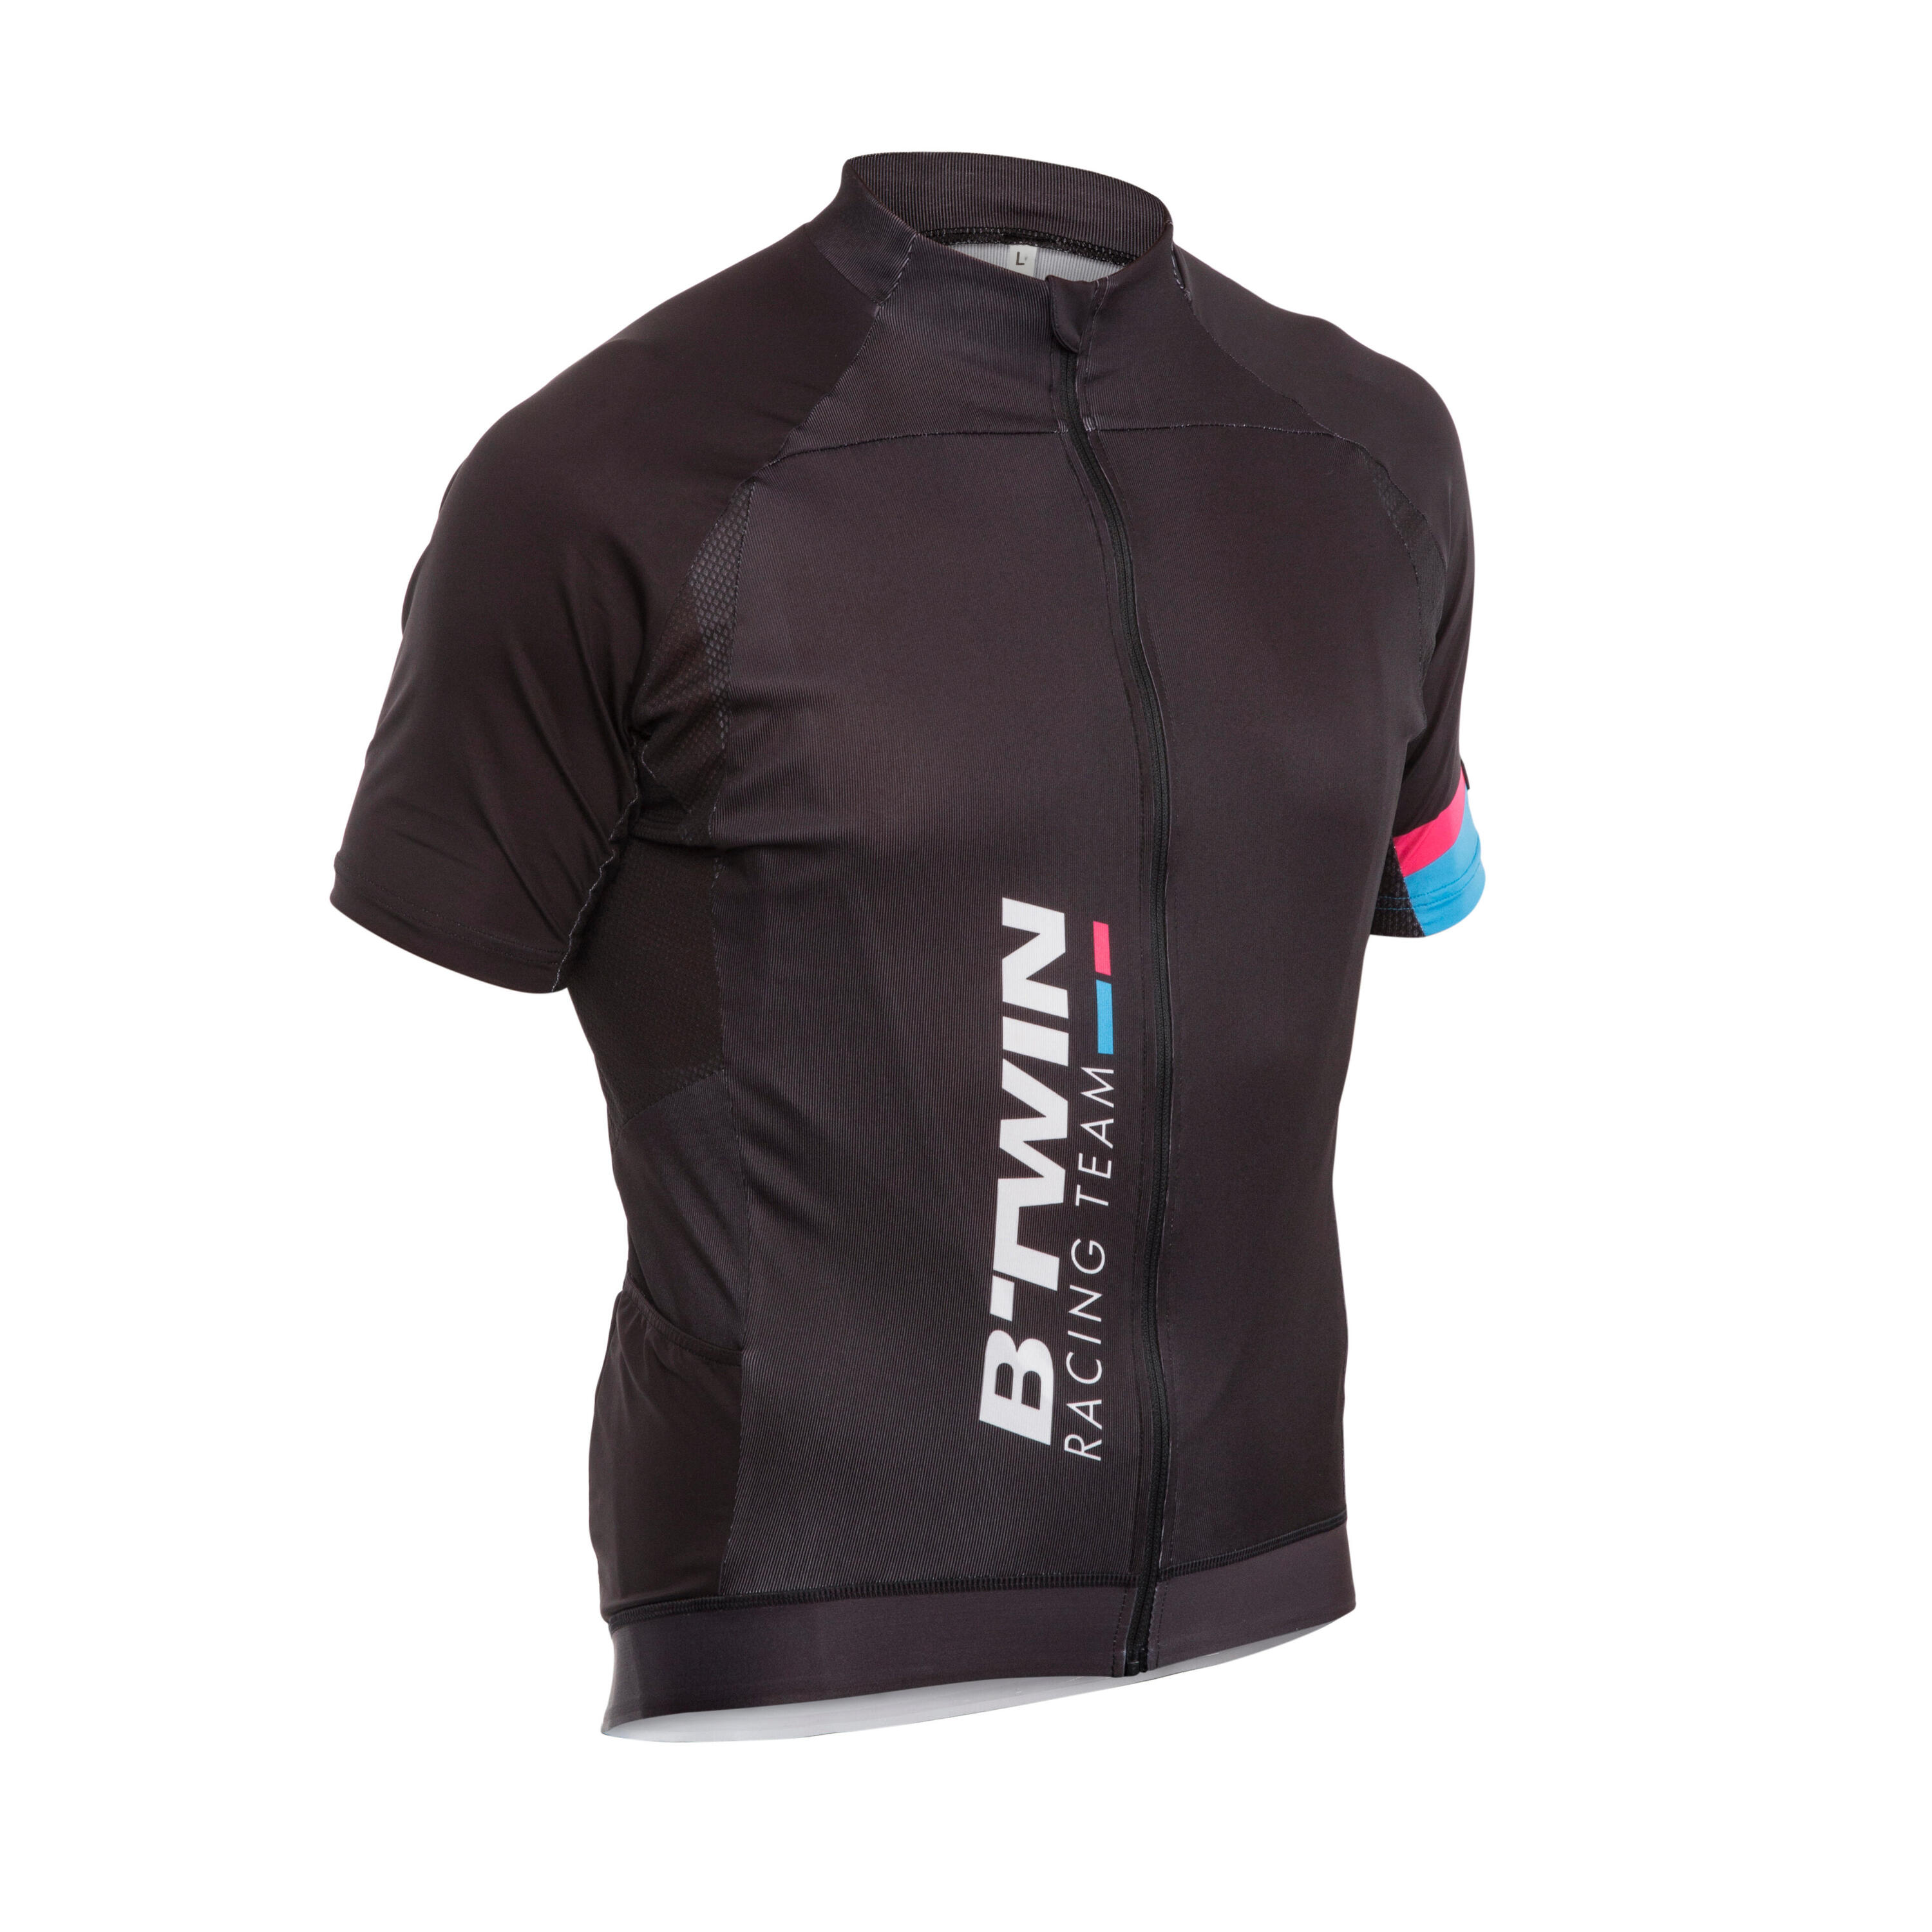 BTWIN 520 Short-Sleeved Cycling Jersey - Black/Blue/Pink